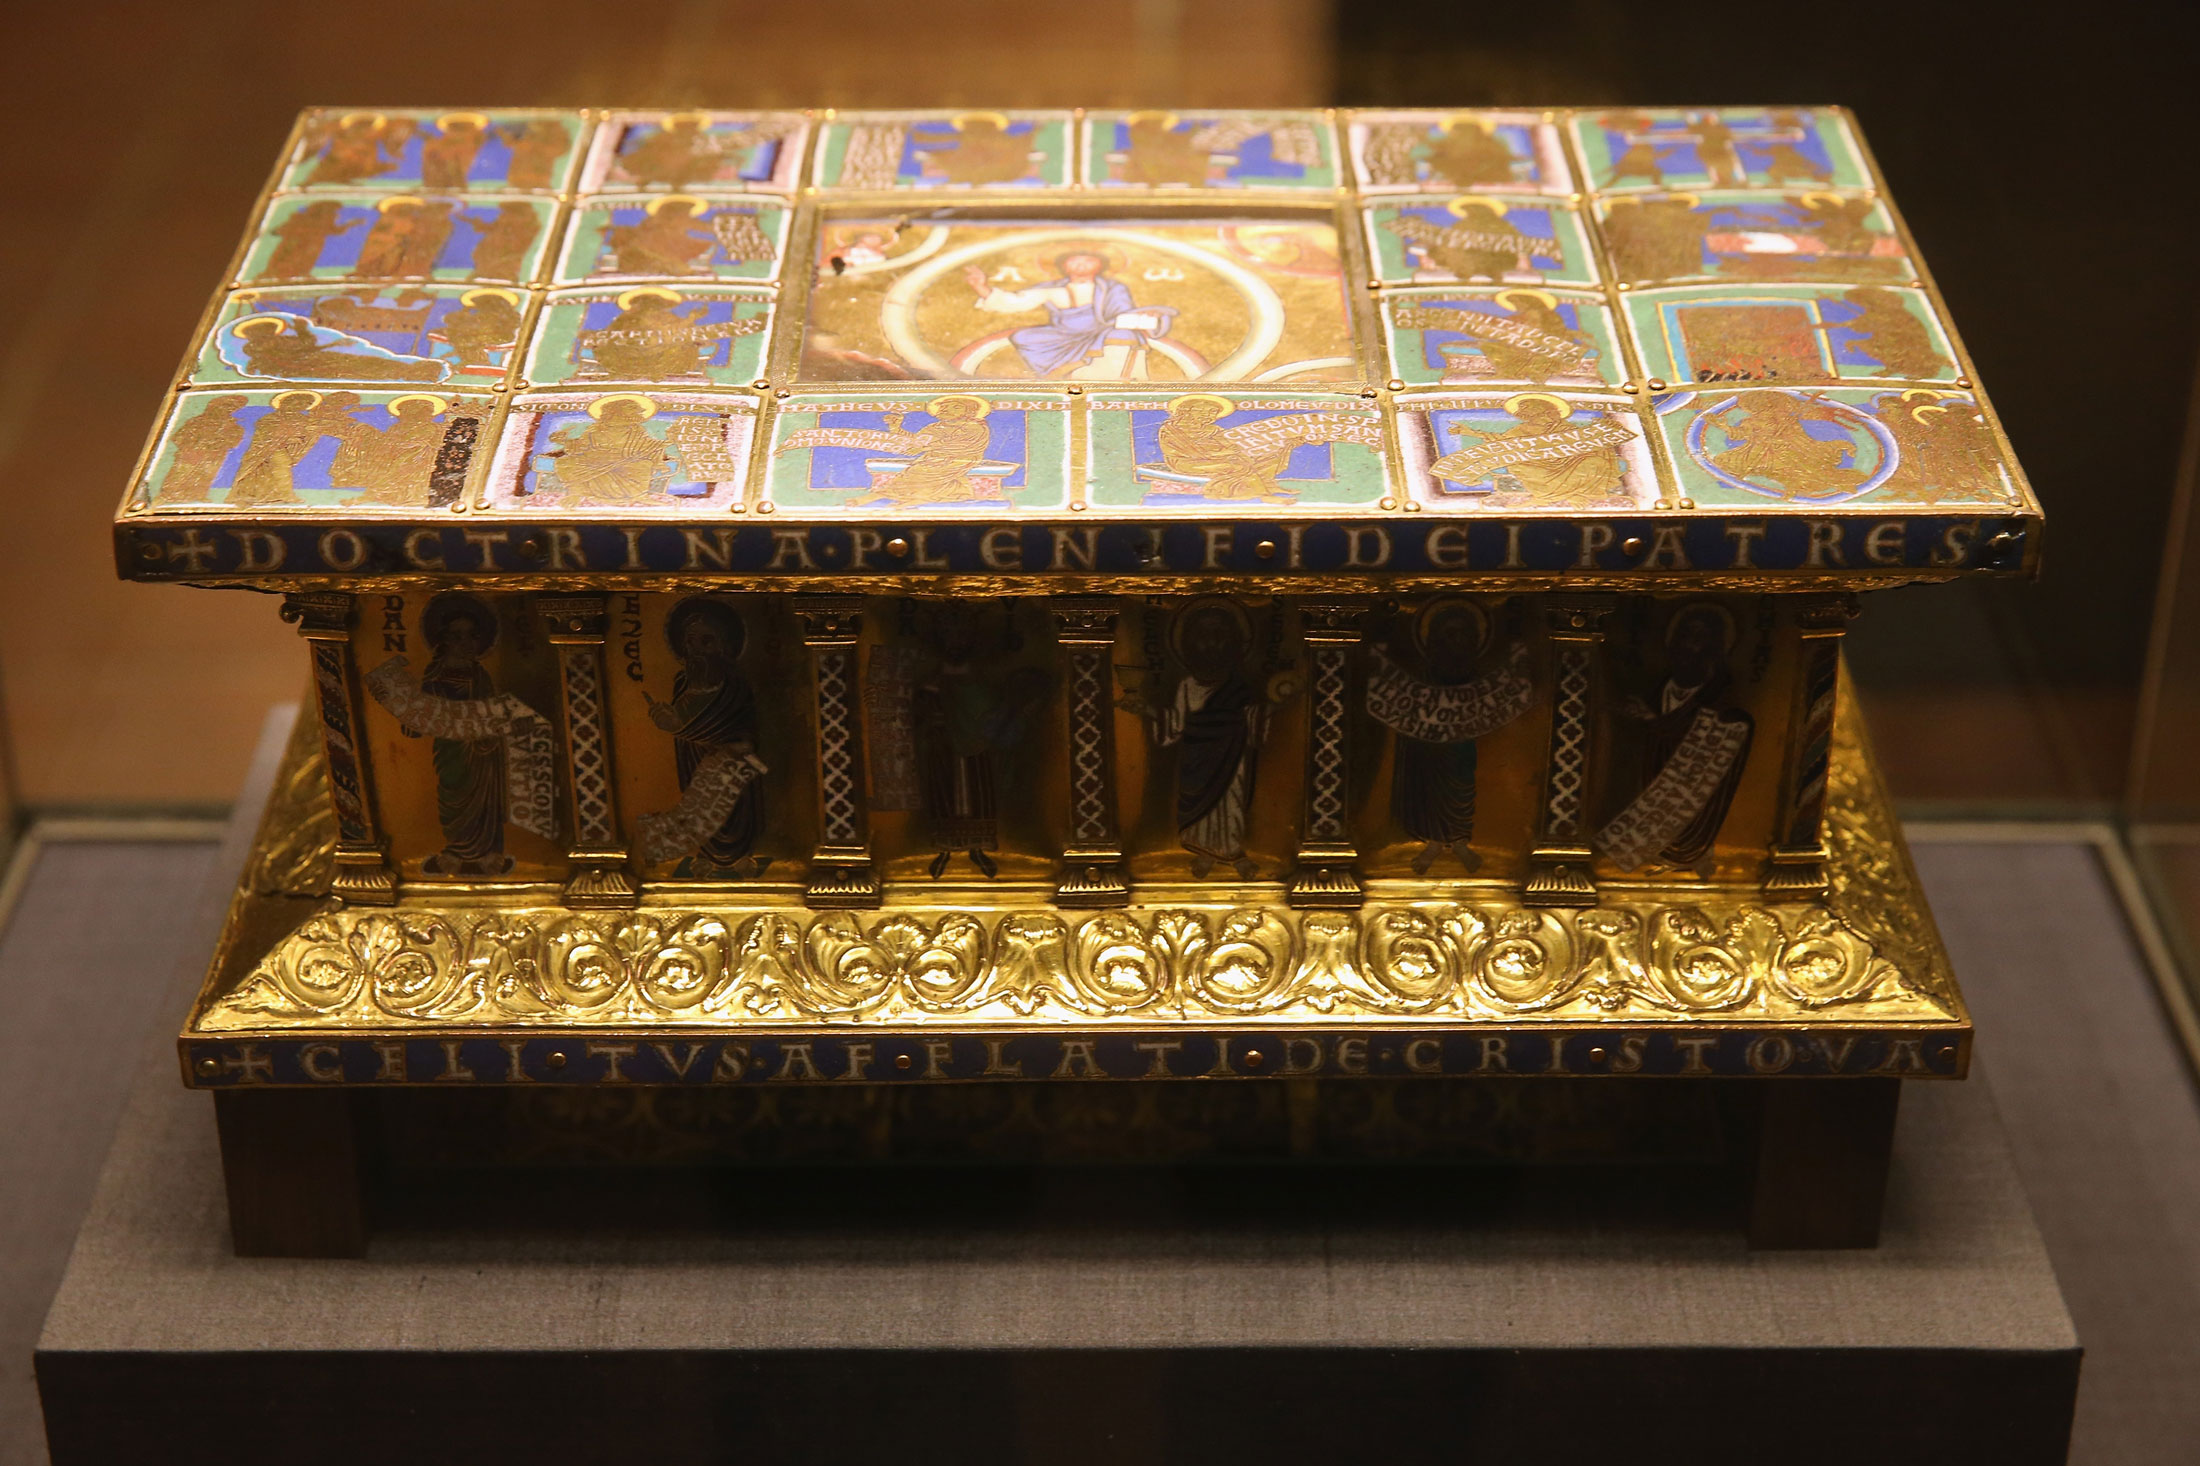 The Portable Alter of Eilbertus on display at the Museum of Decorative Arts in Berlin on Feb. 26, 2015.